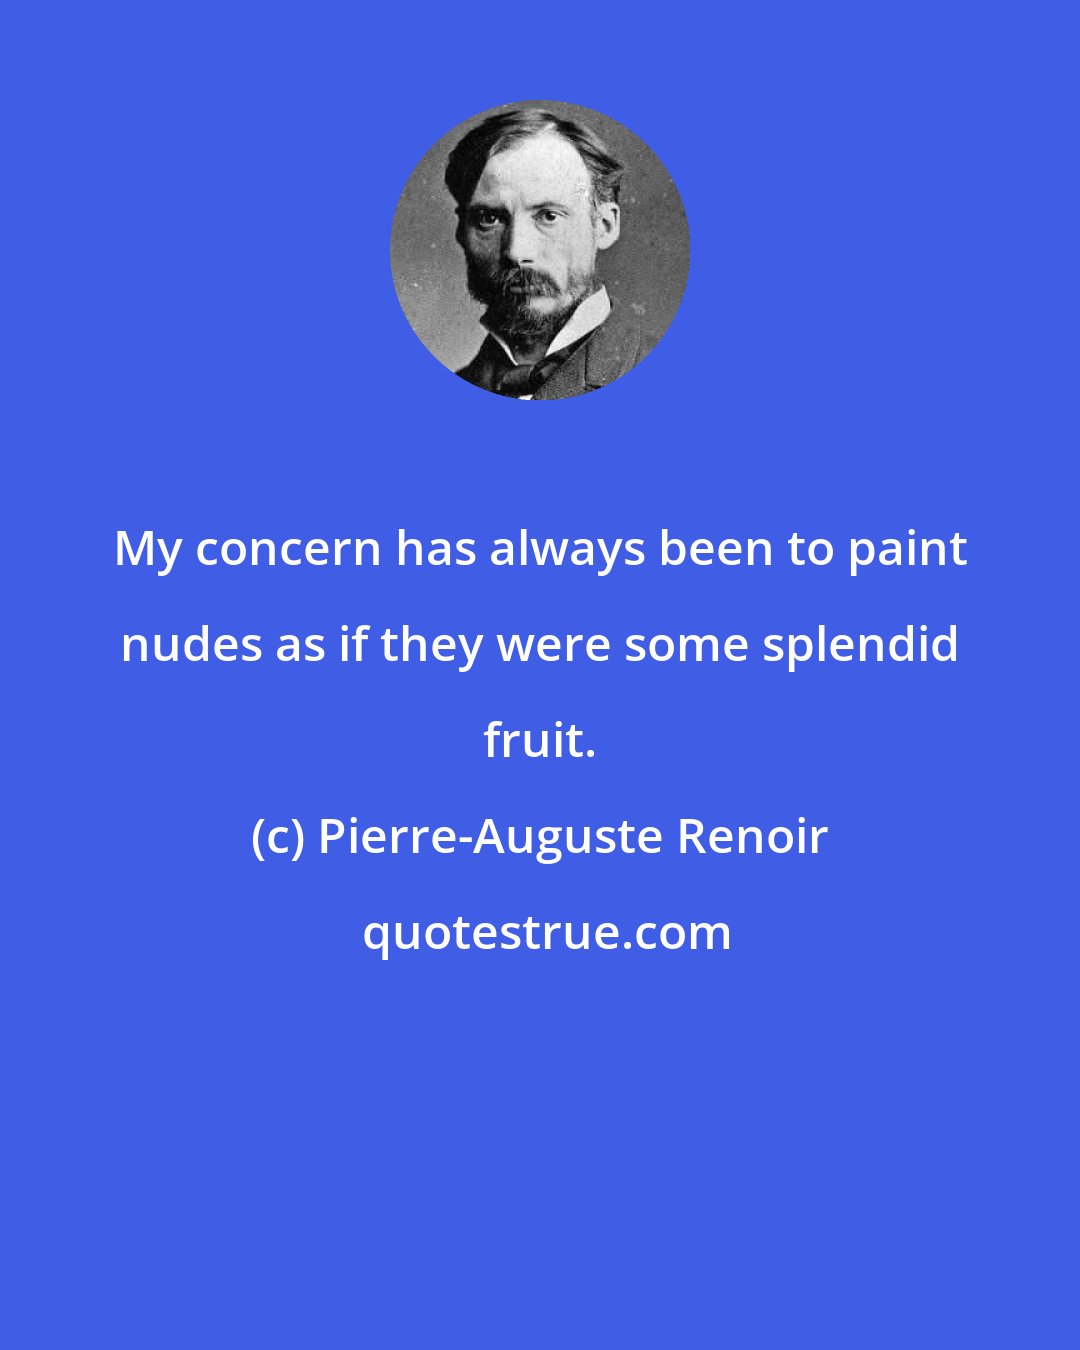 Pierre-Auguste Renoir: My concern has always been to paint nudes as if they were some splendid fruit.